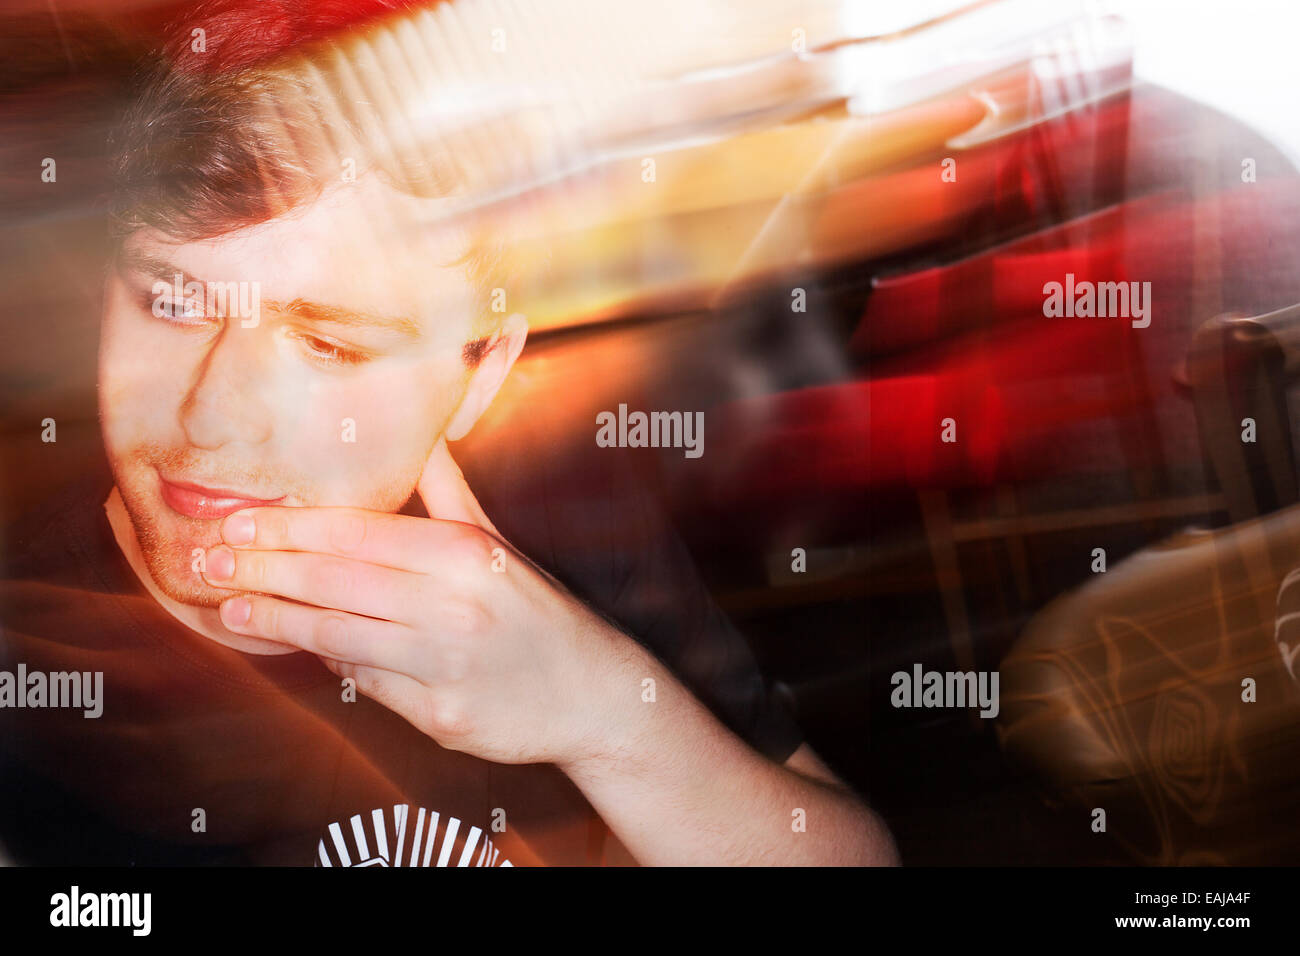 A white European male age 19 in a coffee shot in the UK, image is in colour with flash blur Stock Photo